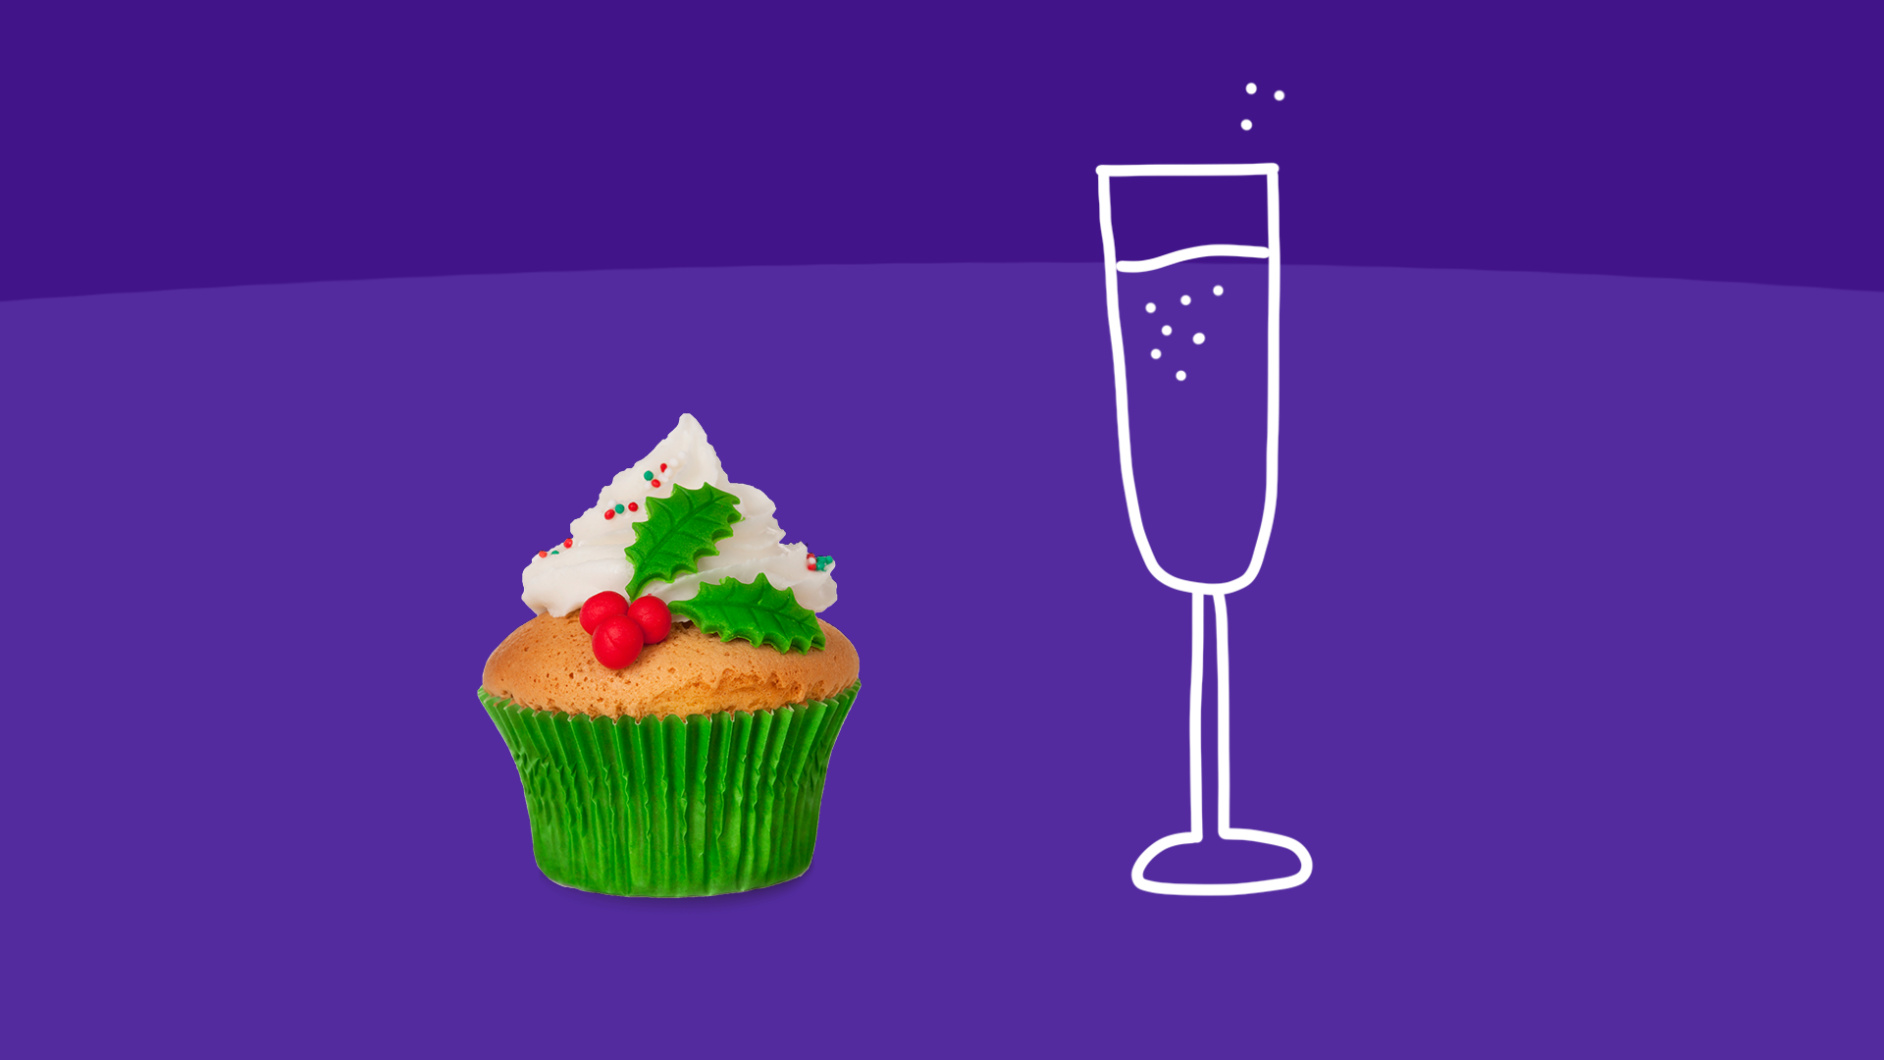 Heart healthy tips - cupcake and champagne